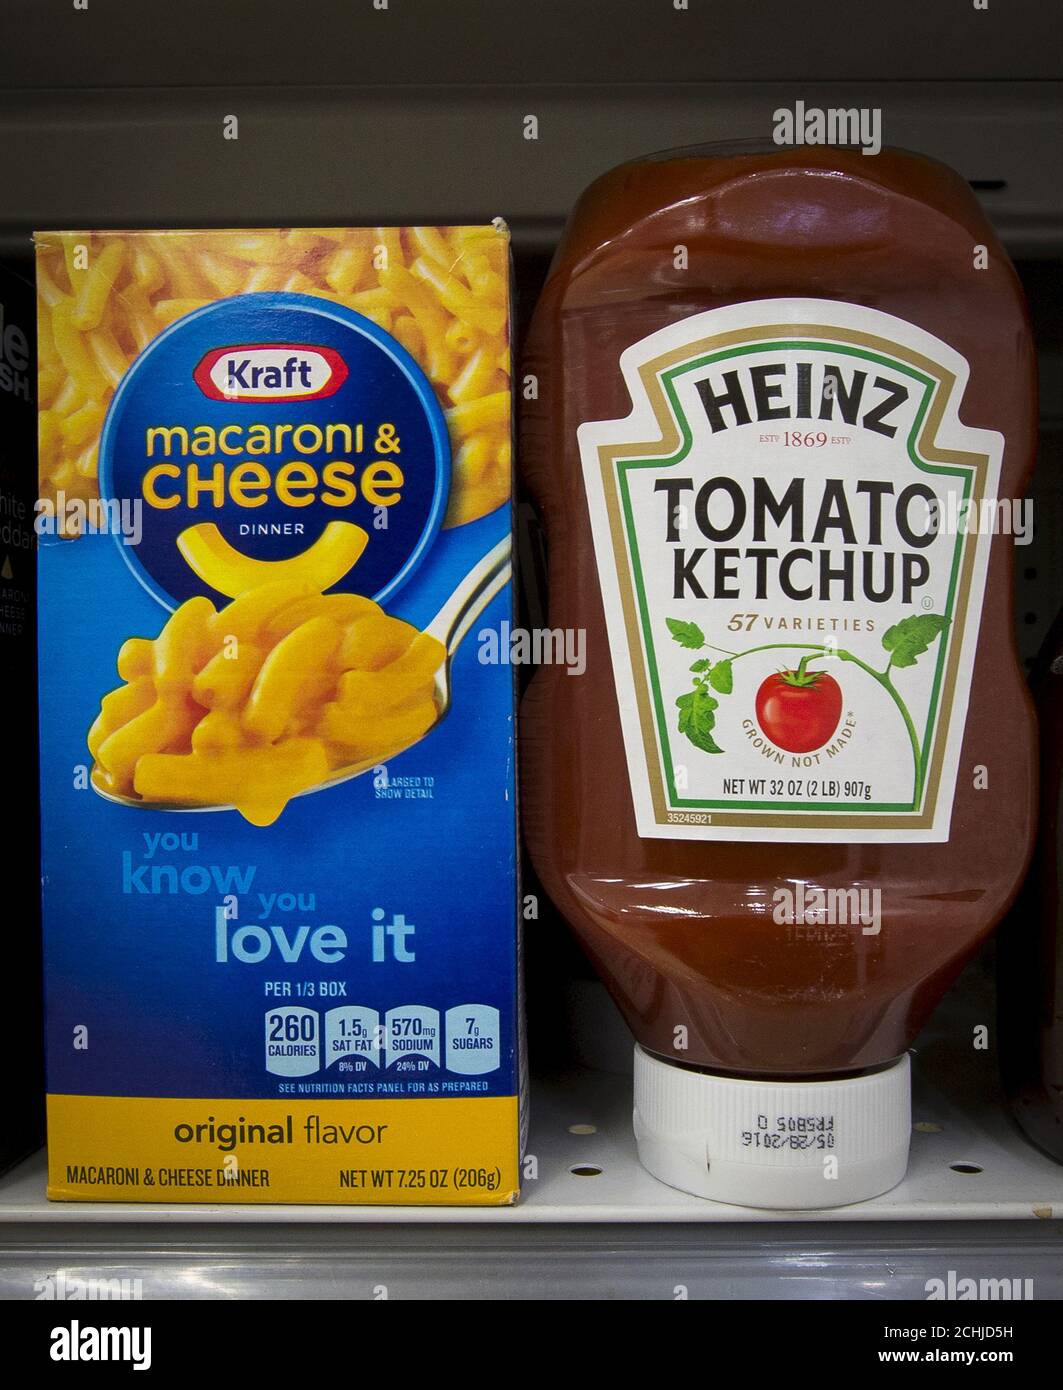 A box of Kraft macaroni and cheese and a Heinz Ketchup bottle are displayed together on a grocery store shelf in New York March 25, 2015. Kraft Foods Group Inc, the maker of Velveeta cheese and Oscar Mayer meats, will merge with ketchup maker H.J. Heinz Co, owned by 3G Capital and Berkshire Hathaway Inc, to form the world's fifth-largest food and beverage company. REUTERS/Brendan McDermid Stock Photo